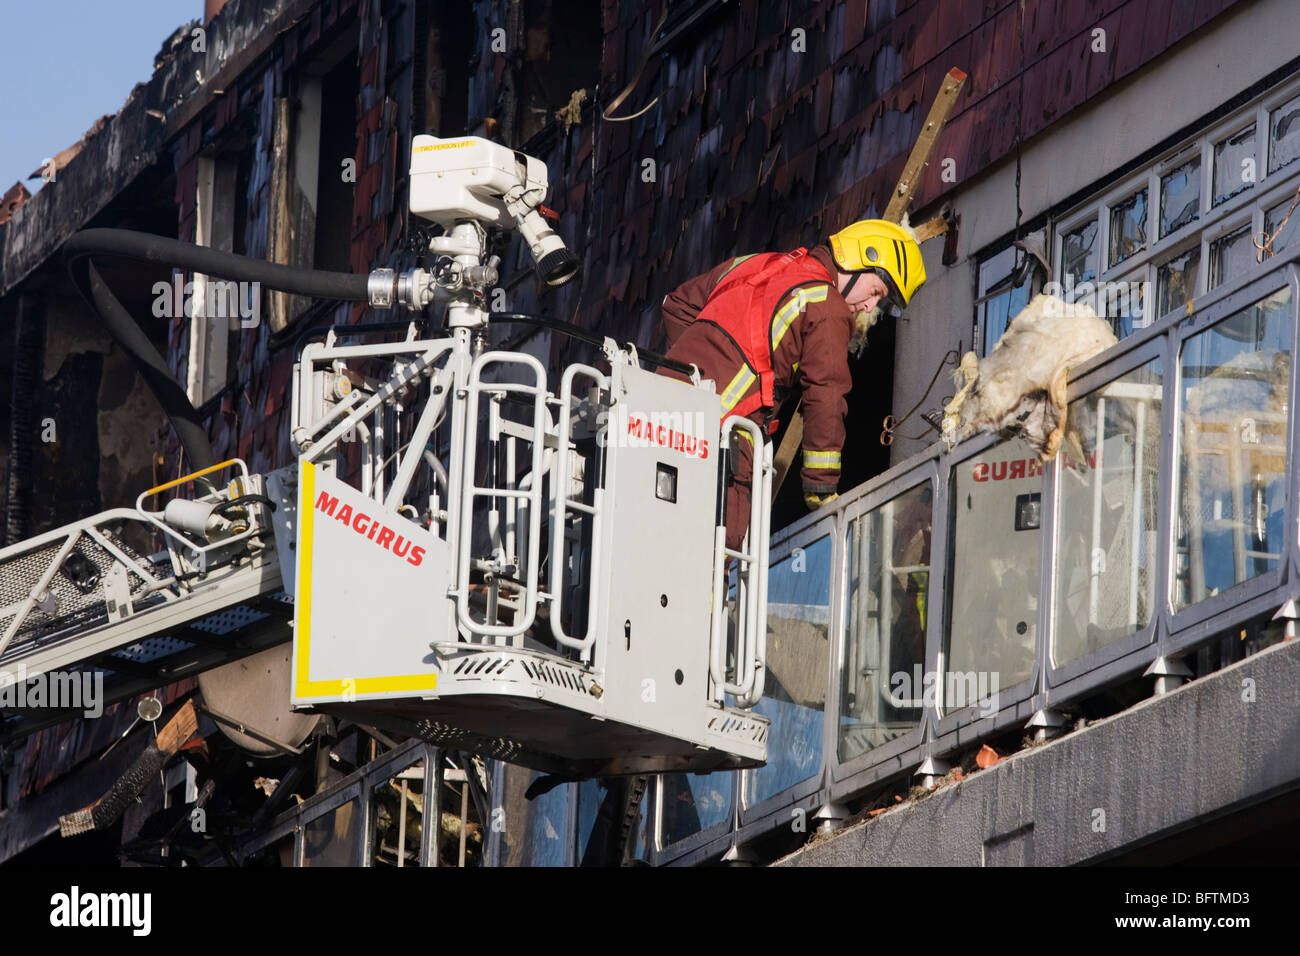 On a Simon Snorkel platform, a fire fighter makes an inspection of properties after an inner-city estate fire in south London. Stock Photo